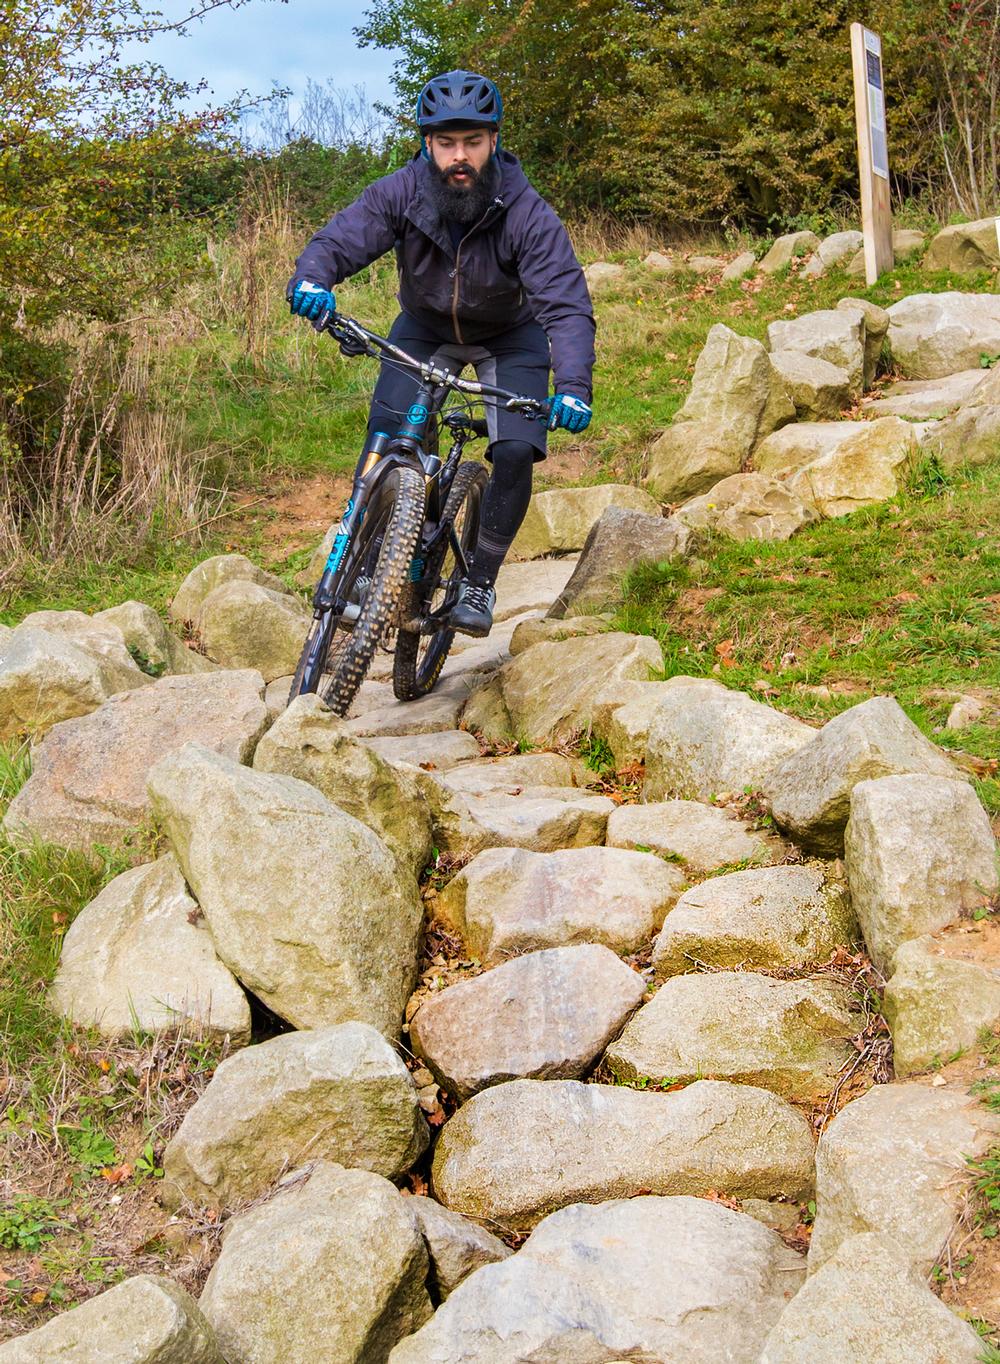 £3m has been invested in Hadleigh Park since it hosted the mountain bike events at London 2012